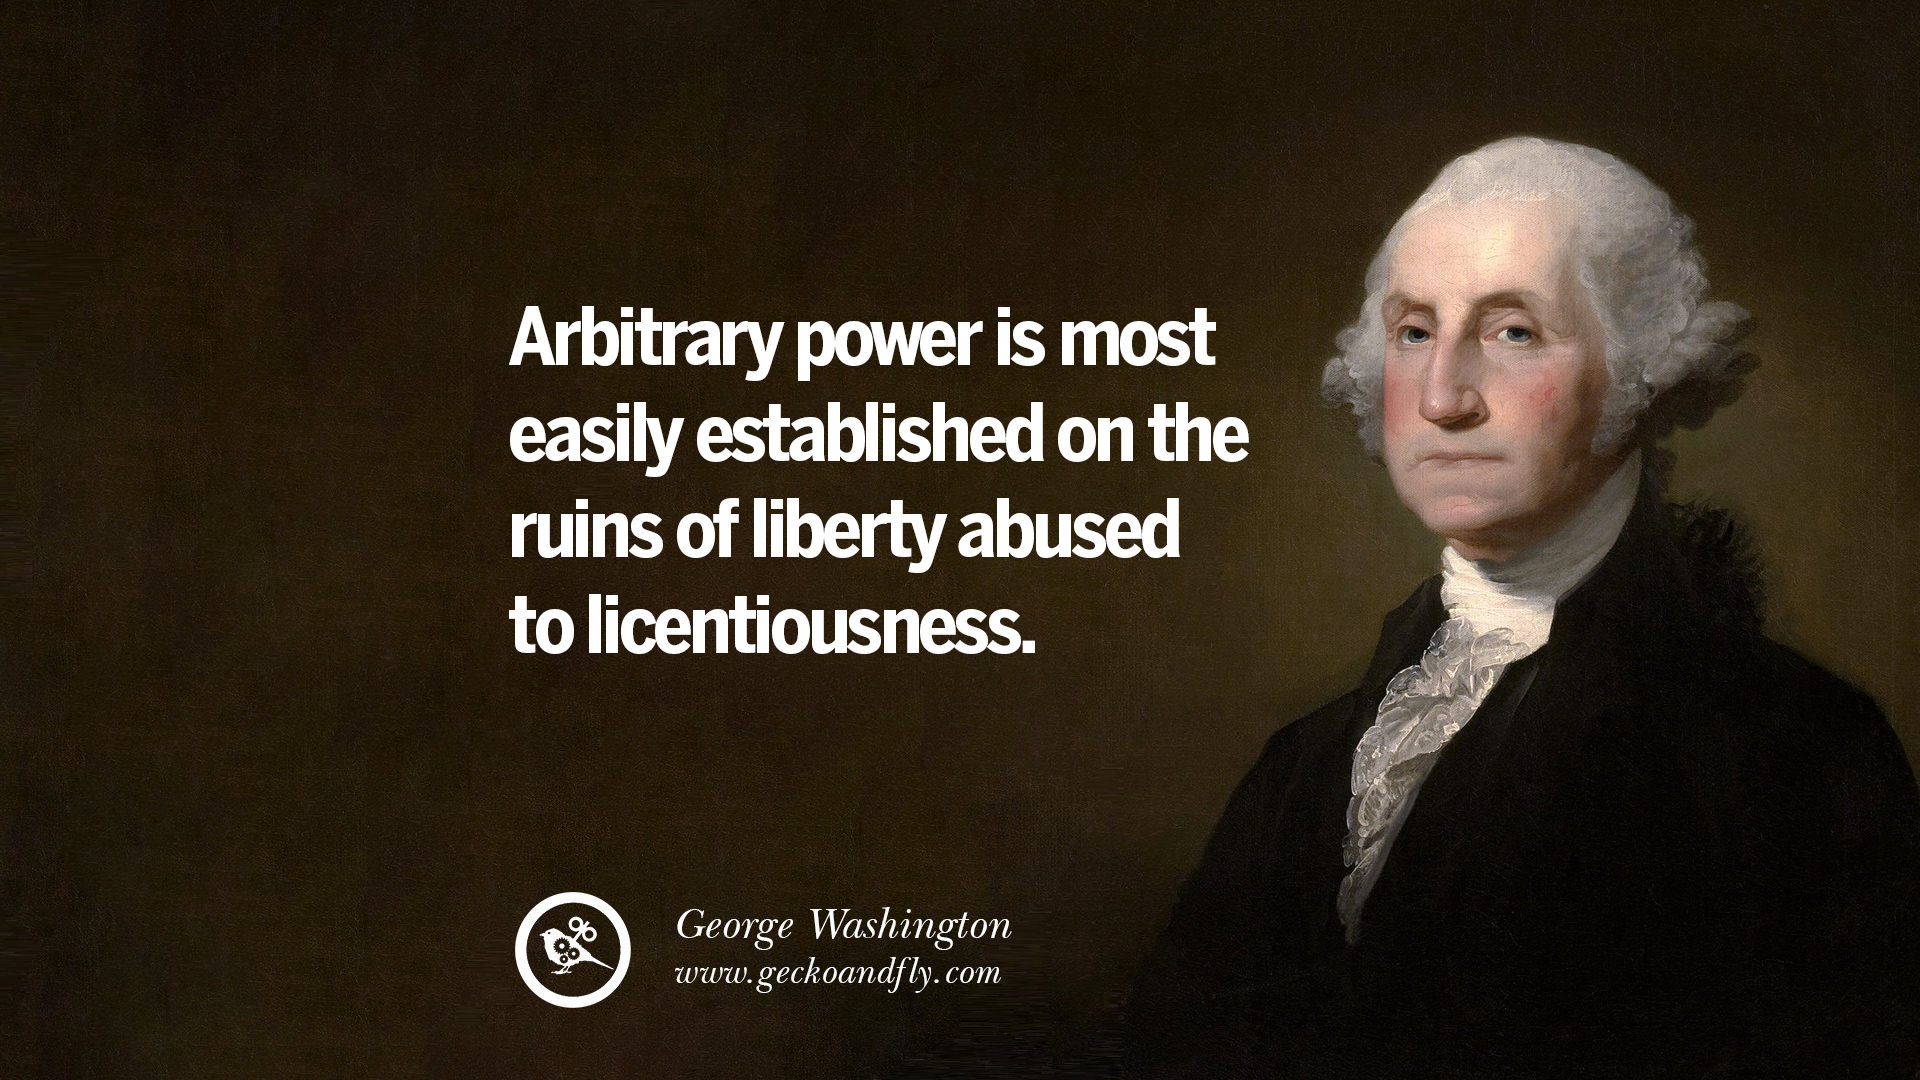 20 Famous George Washington Quotes on Freedom, Faith, Religion, War and